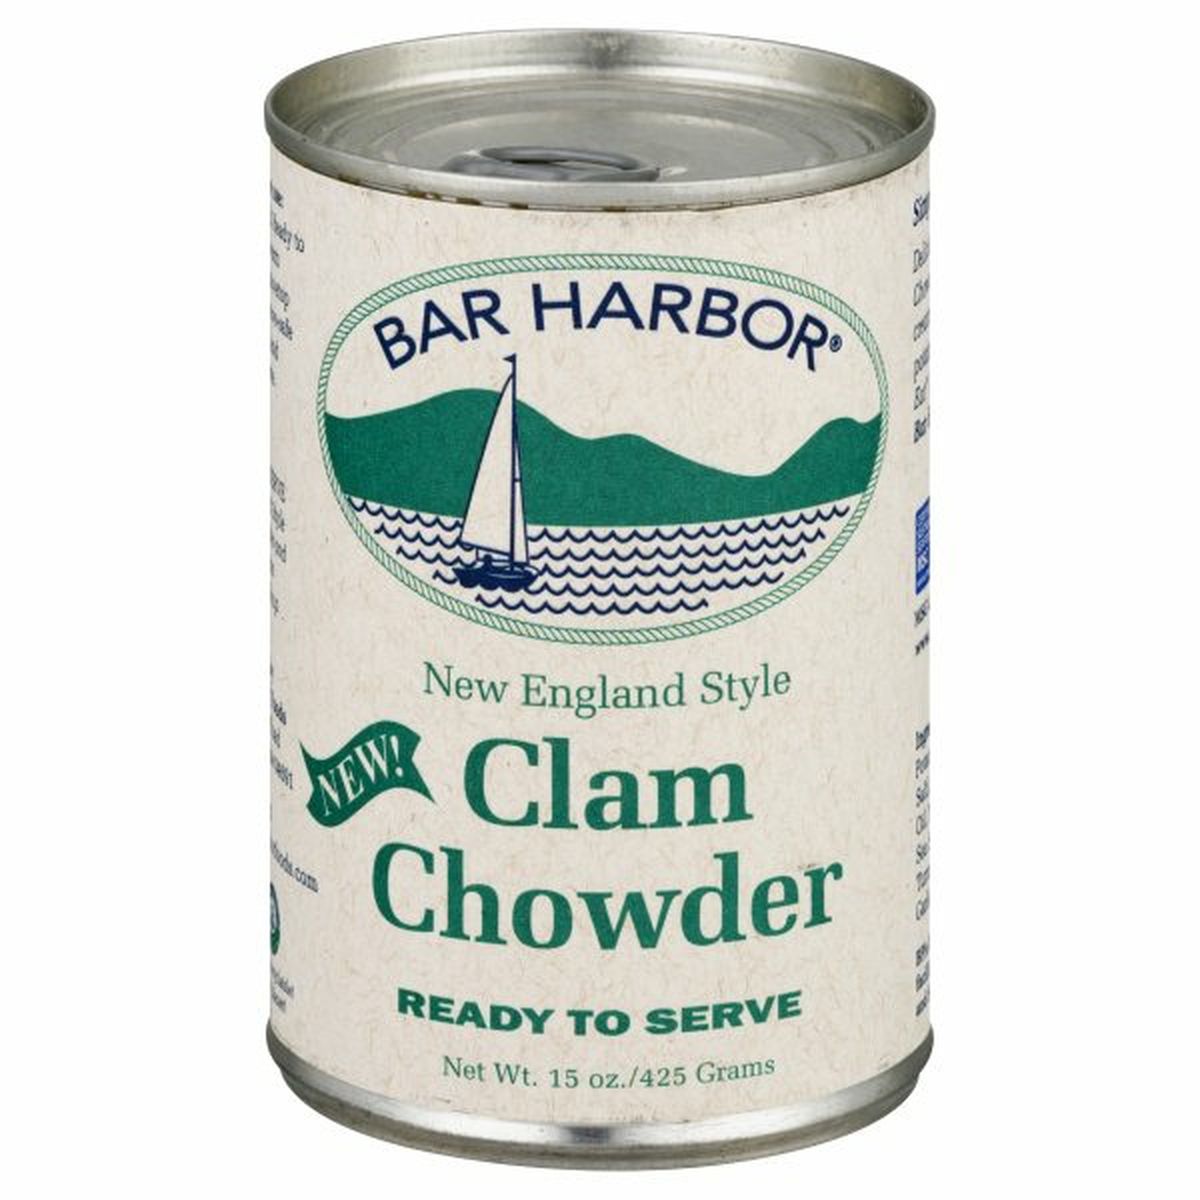 Calories in Bar Harbor Clam Chowder, New England Style